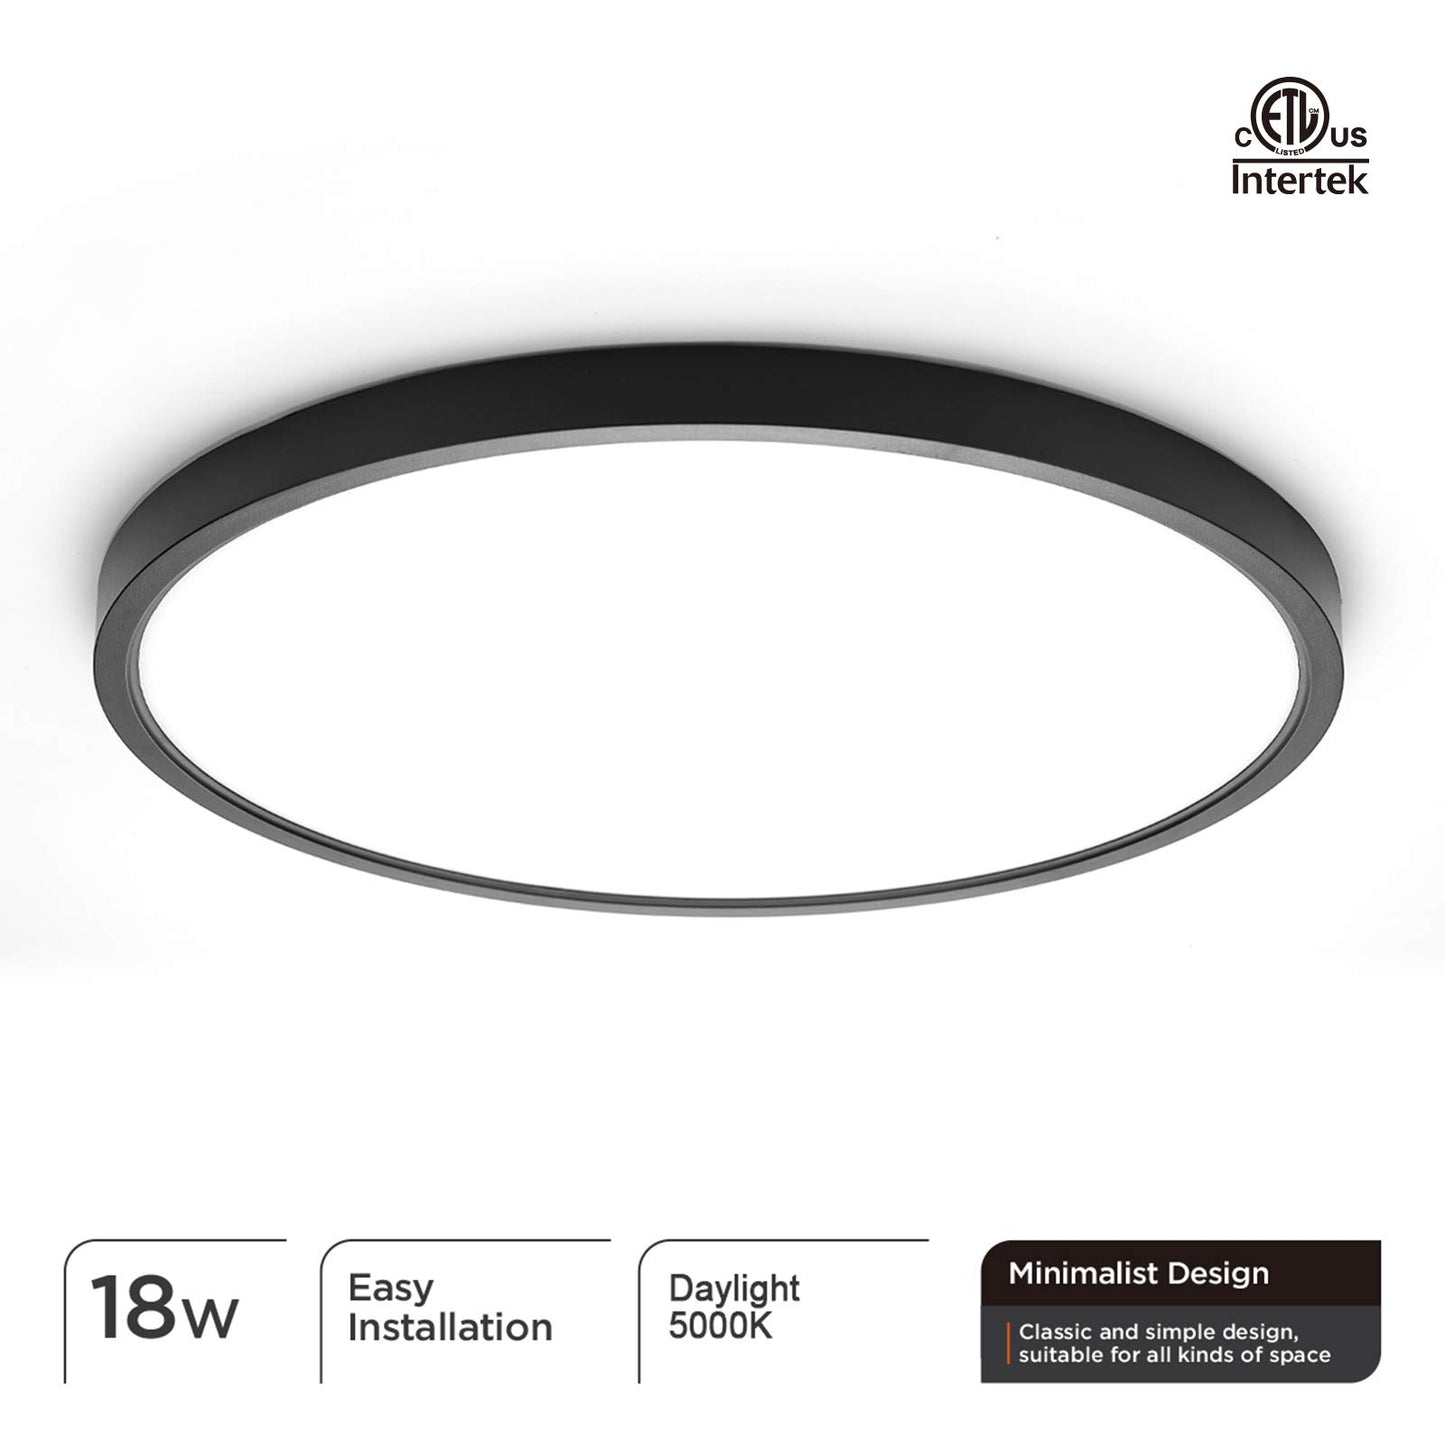 TALOYA LED Flush Mount Ceiling Light 5000k 8.9inch Round Black 18w=180w(Equivalent) Simple Lamp for Bedroom Hallway Kitchen Gallery Low Ceilings Areas, ETL Listed - Like New